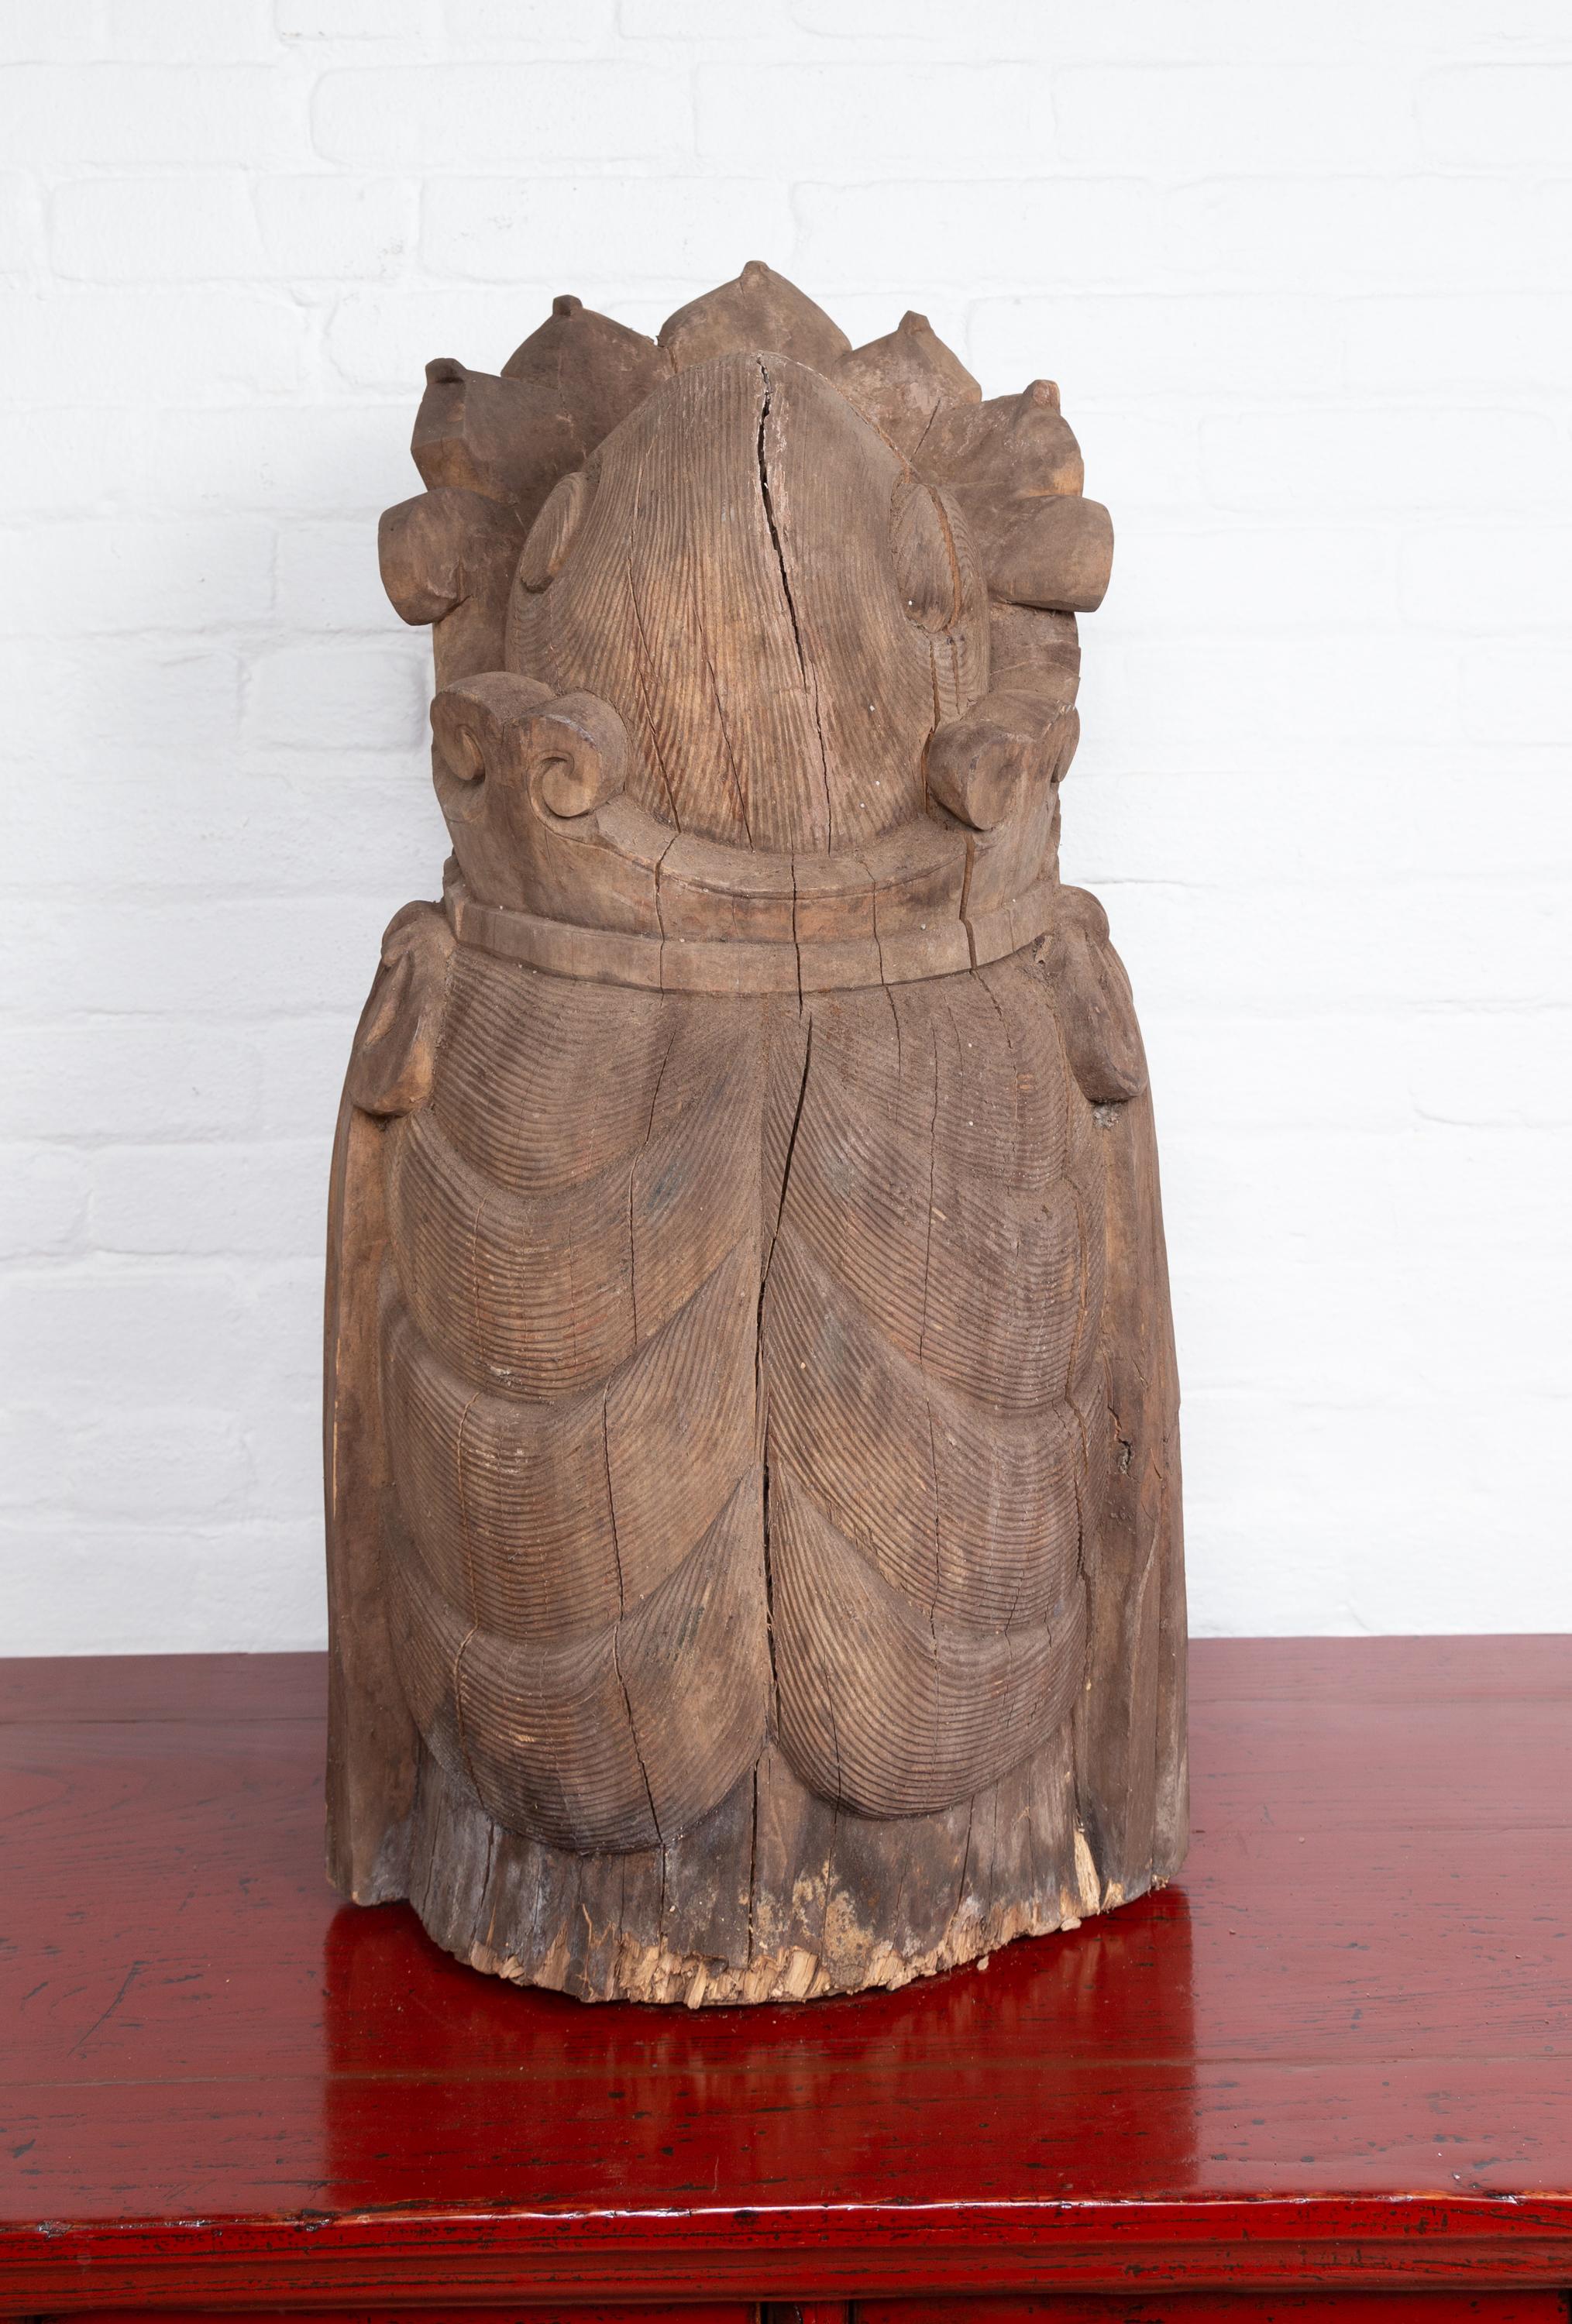 20th Century Vintage Thai Carved Wooden Head Sculpture of Guanyin, Bodhisattva of Compassion